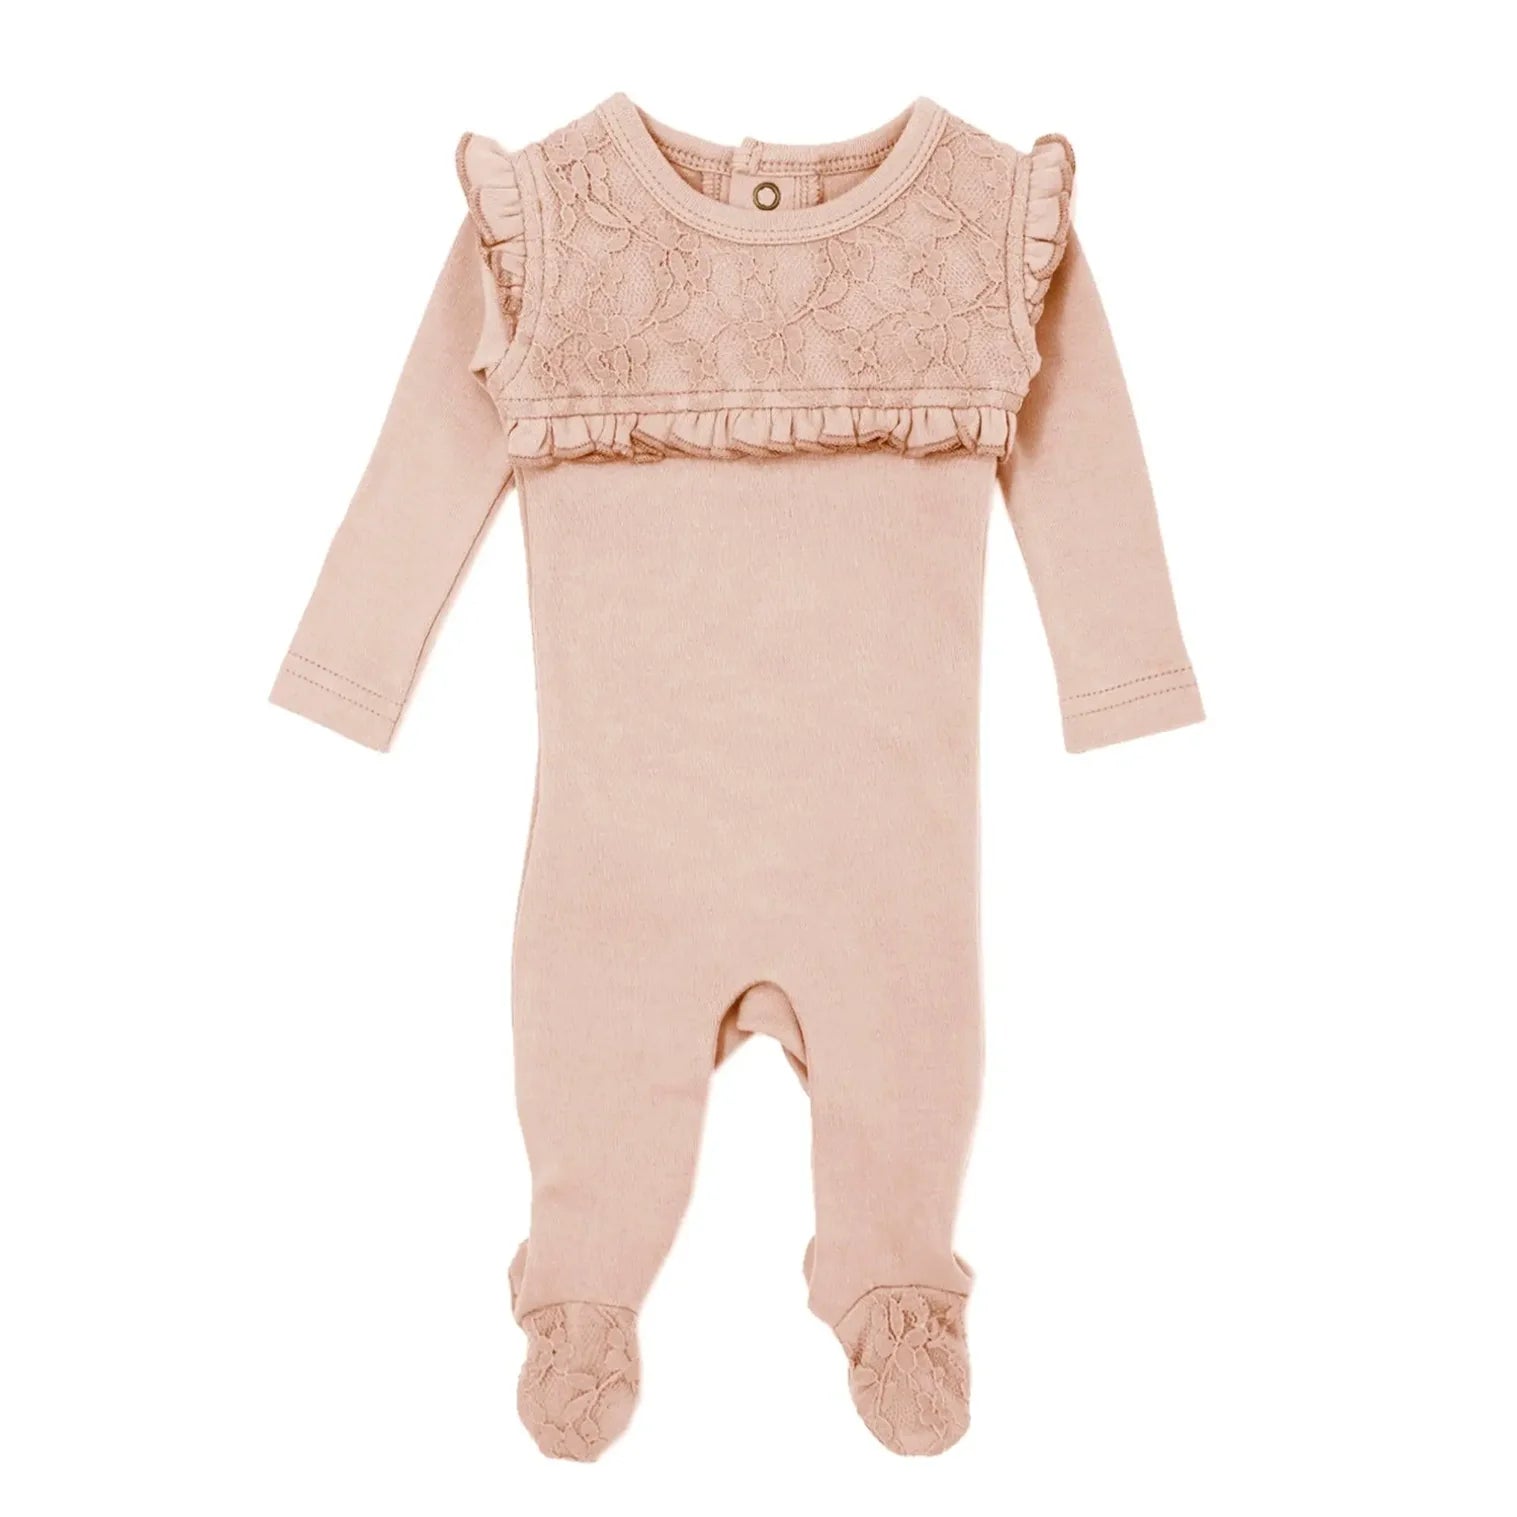 L’ovedbaby Organic Lace Footie in Rosewater 9-12m